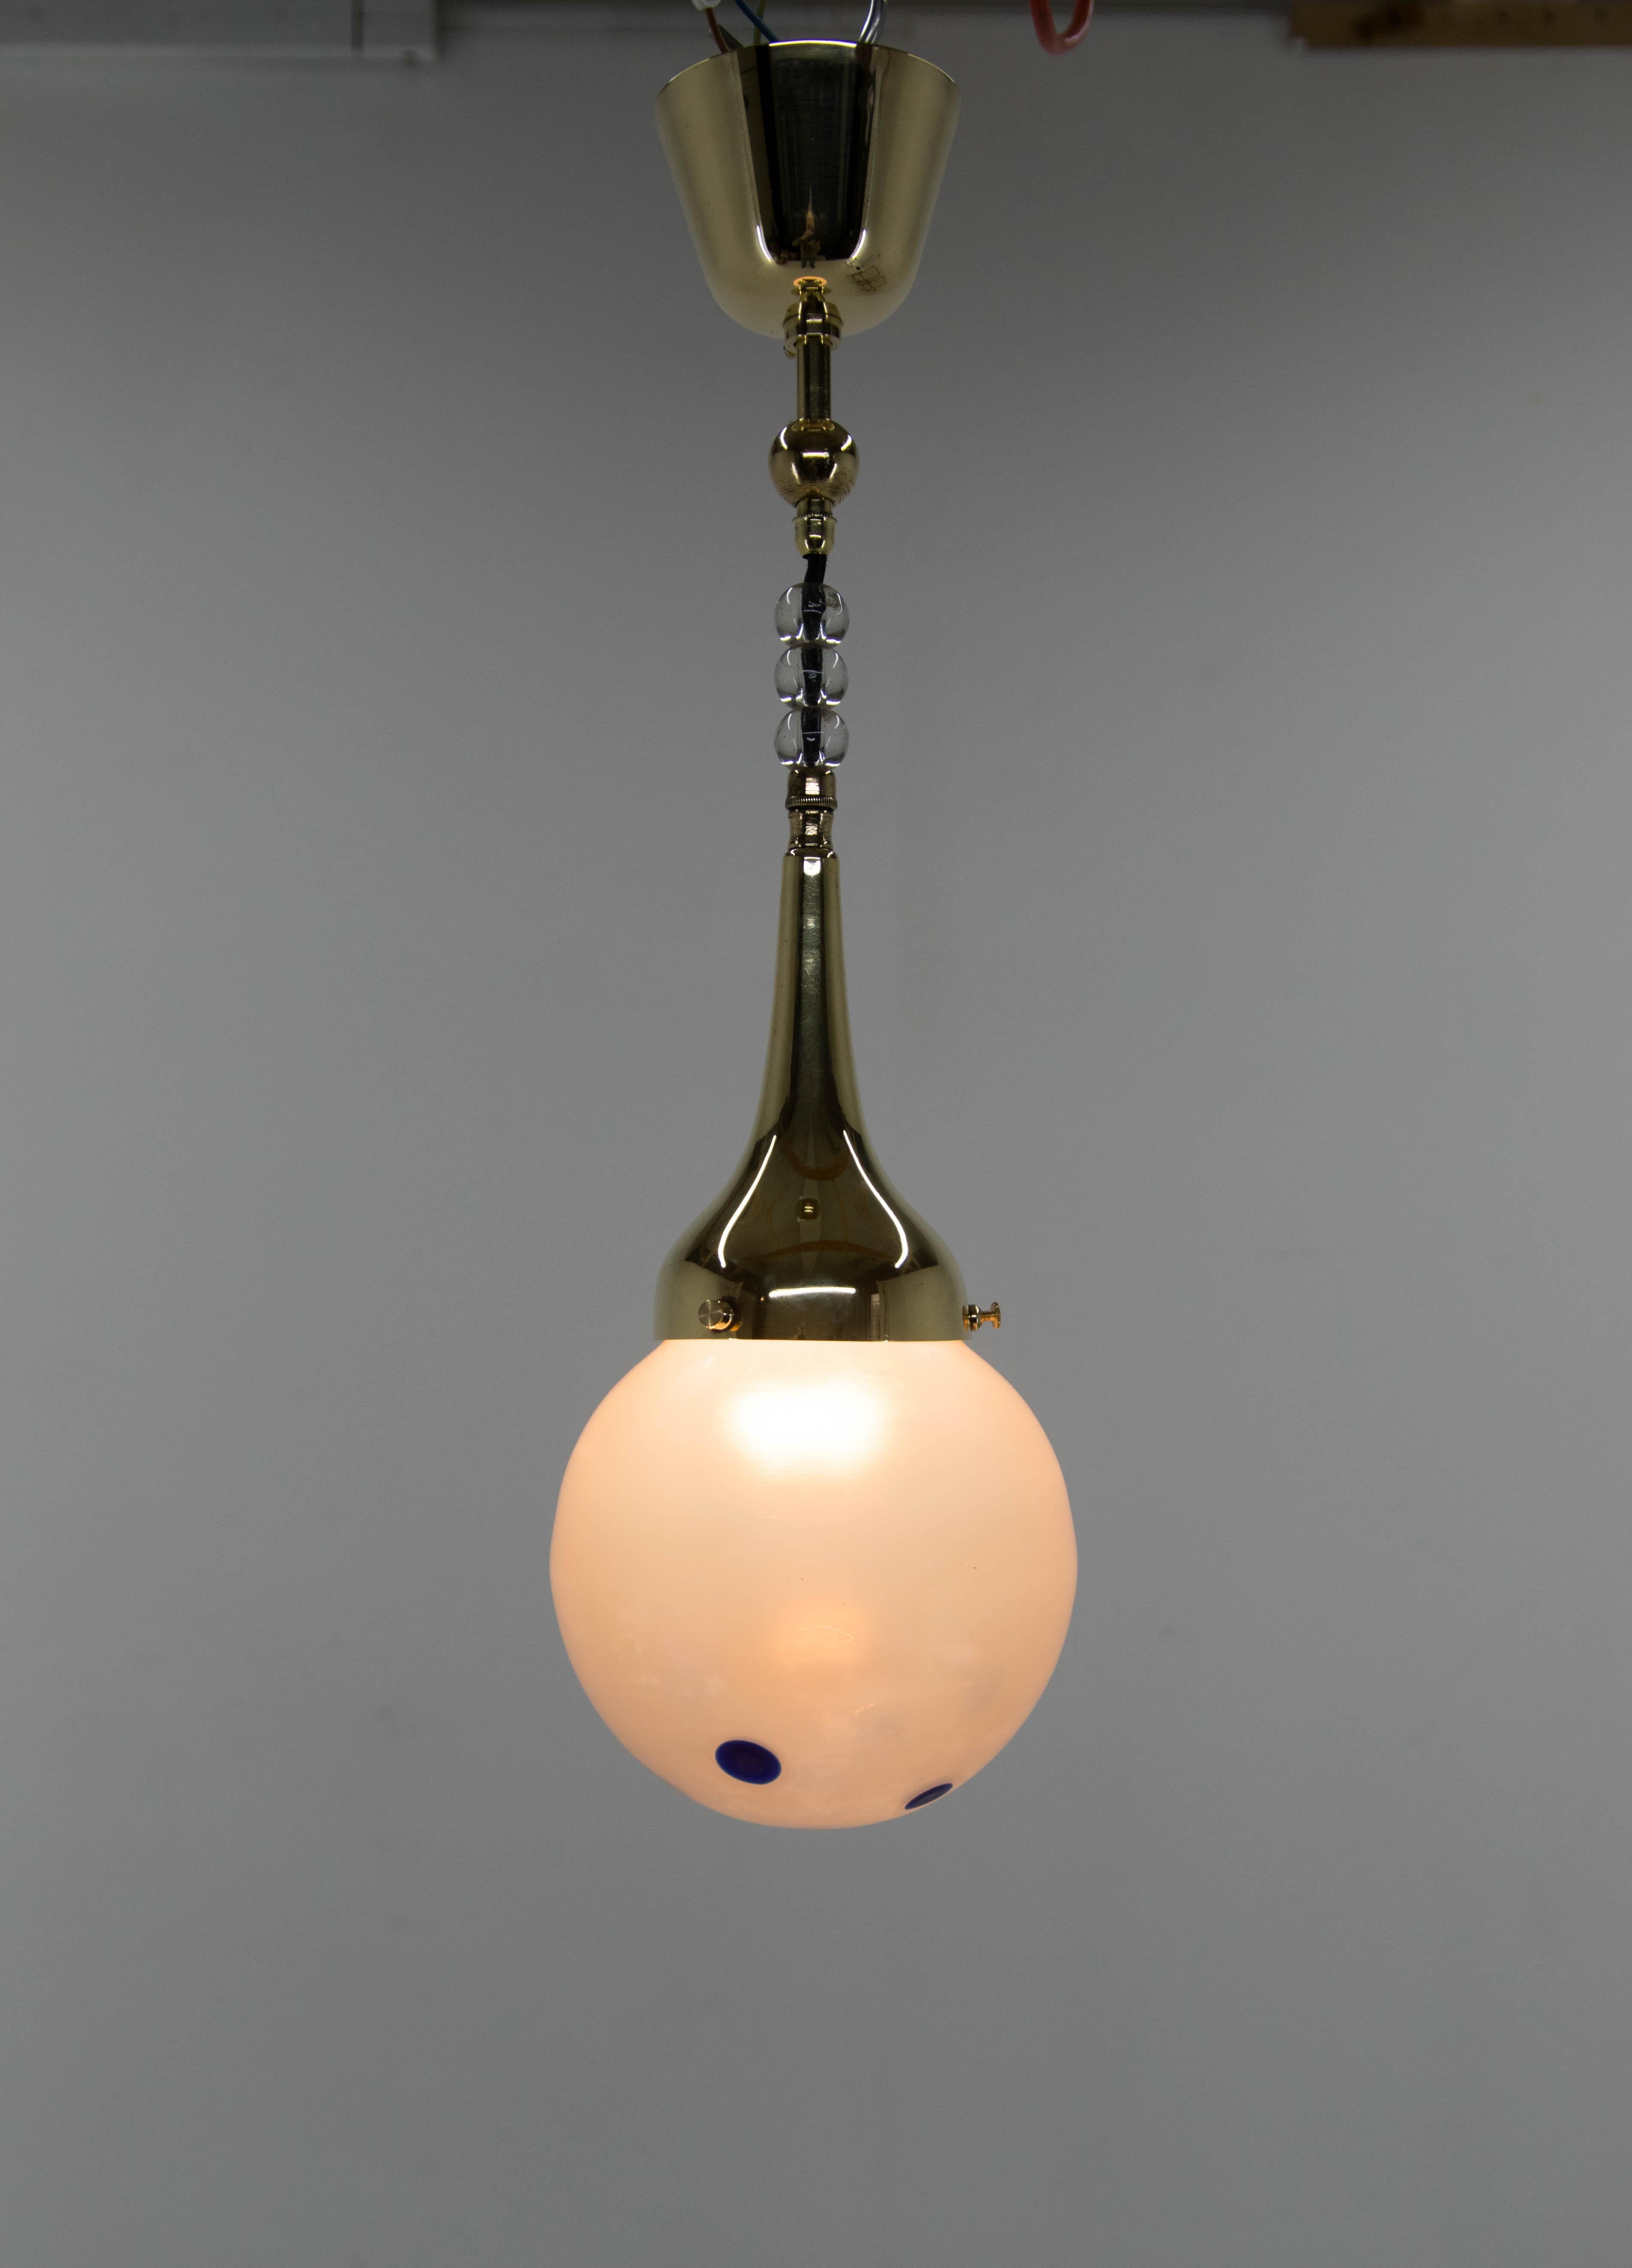 Small tiny pendant. 
Restored, brass polished
Rewired: 1x40W, E25-E27 bulb
US wiring compatible.